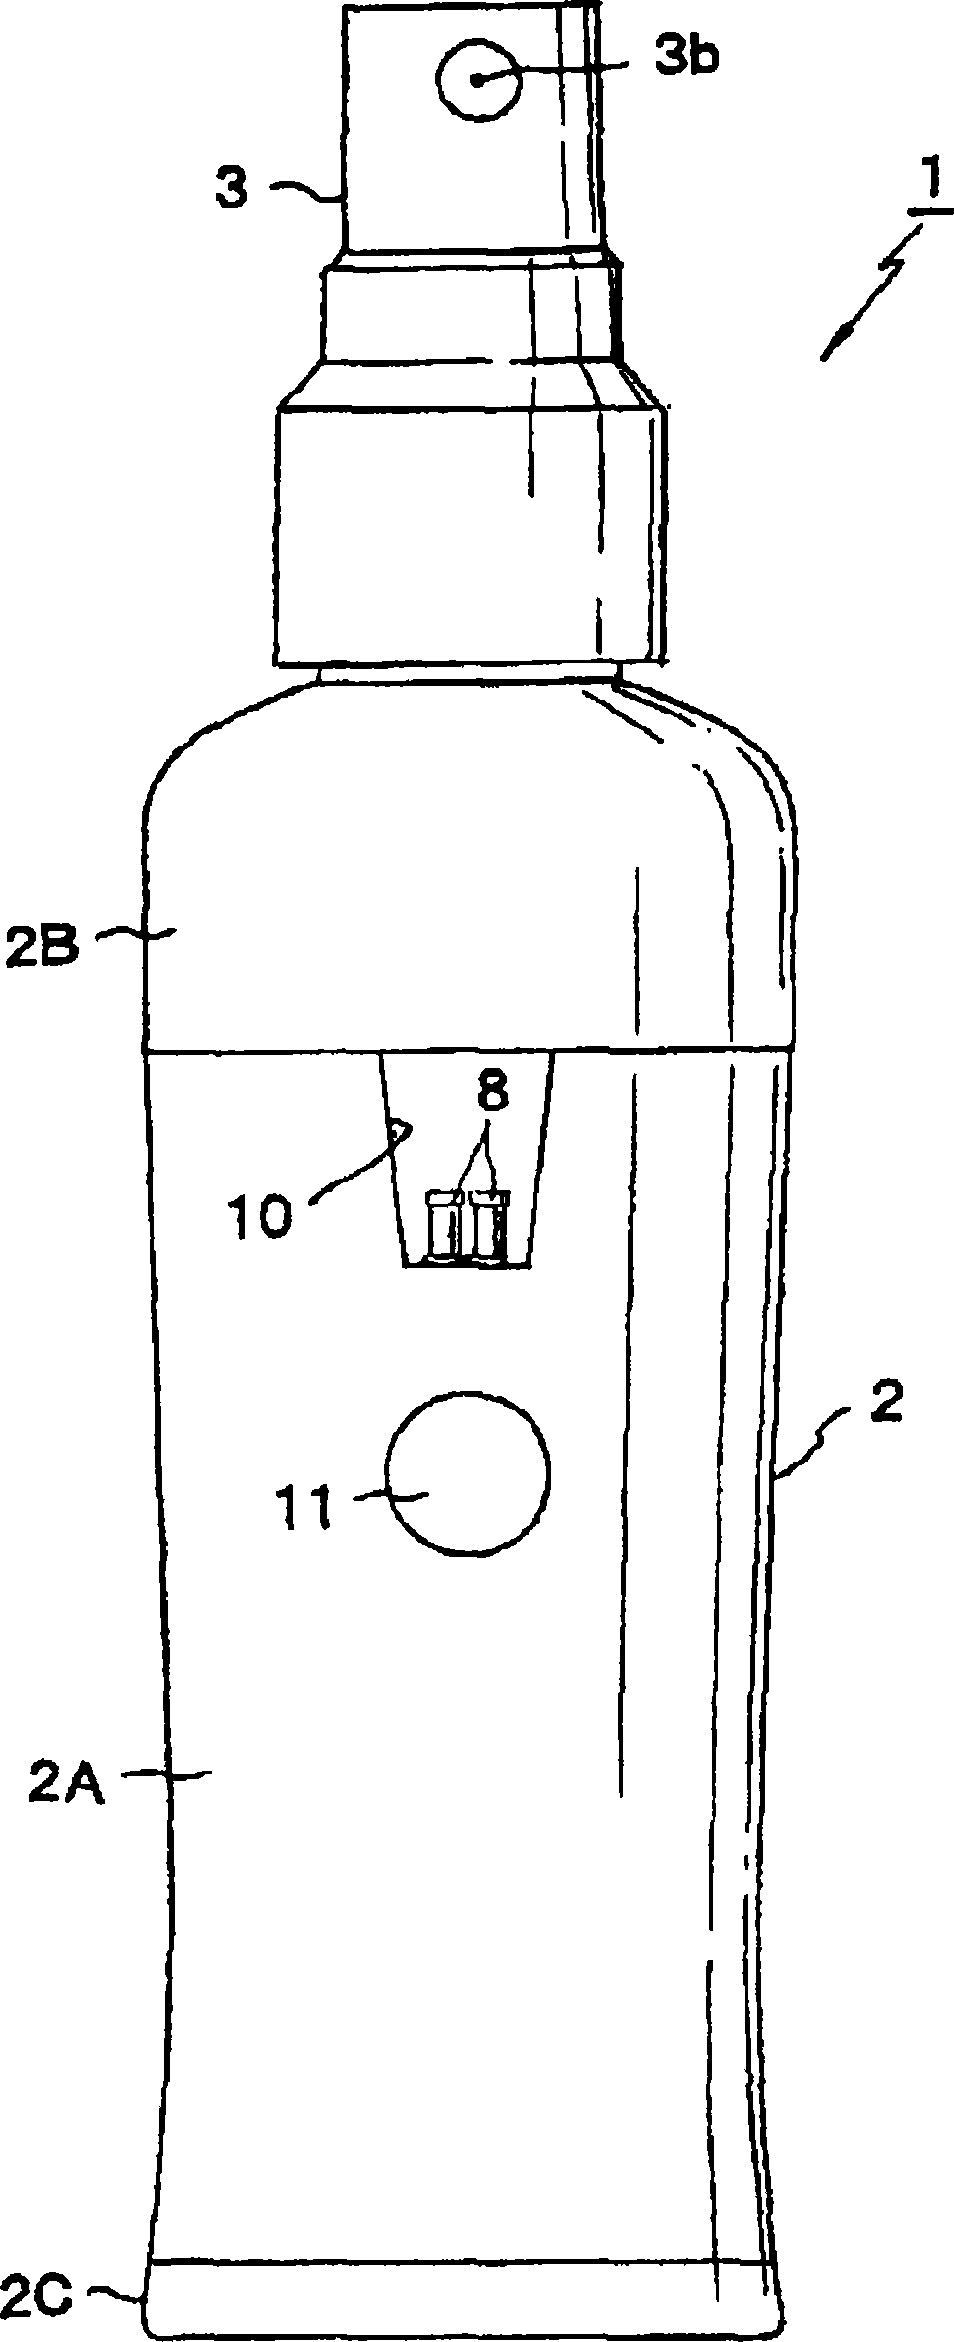 Electrolyzed water generating and spraying device